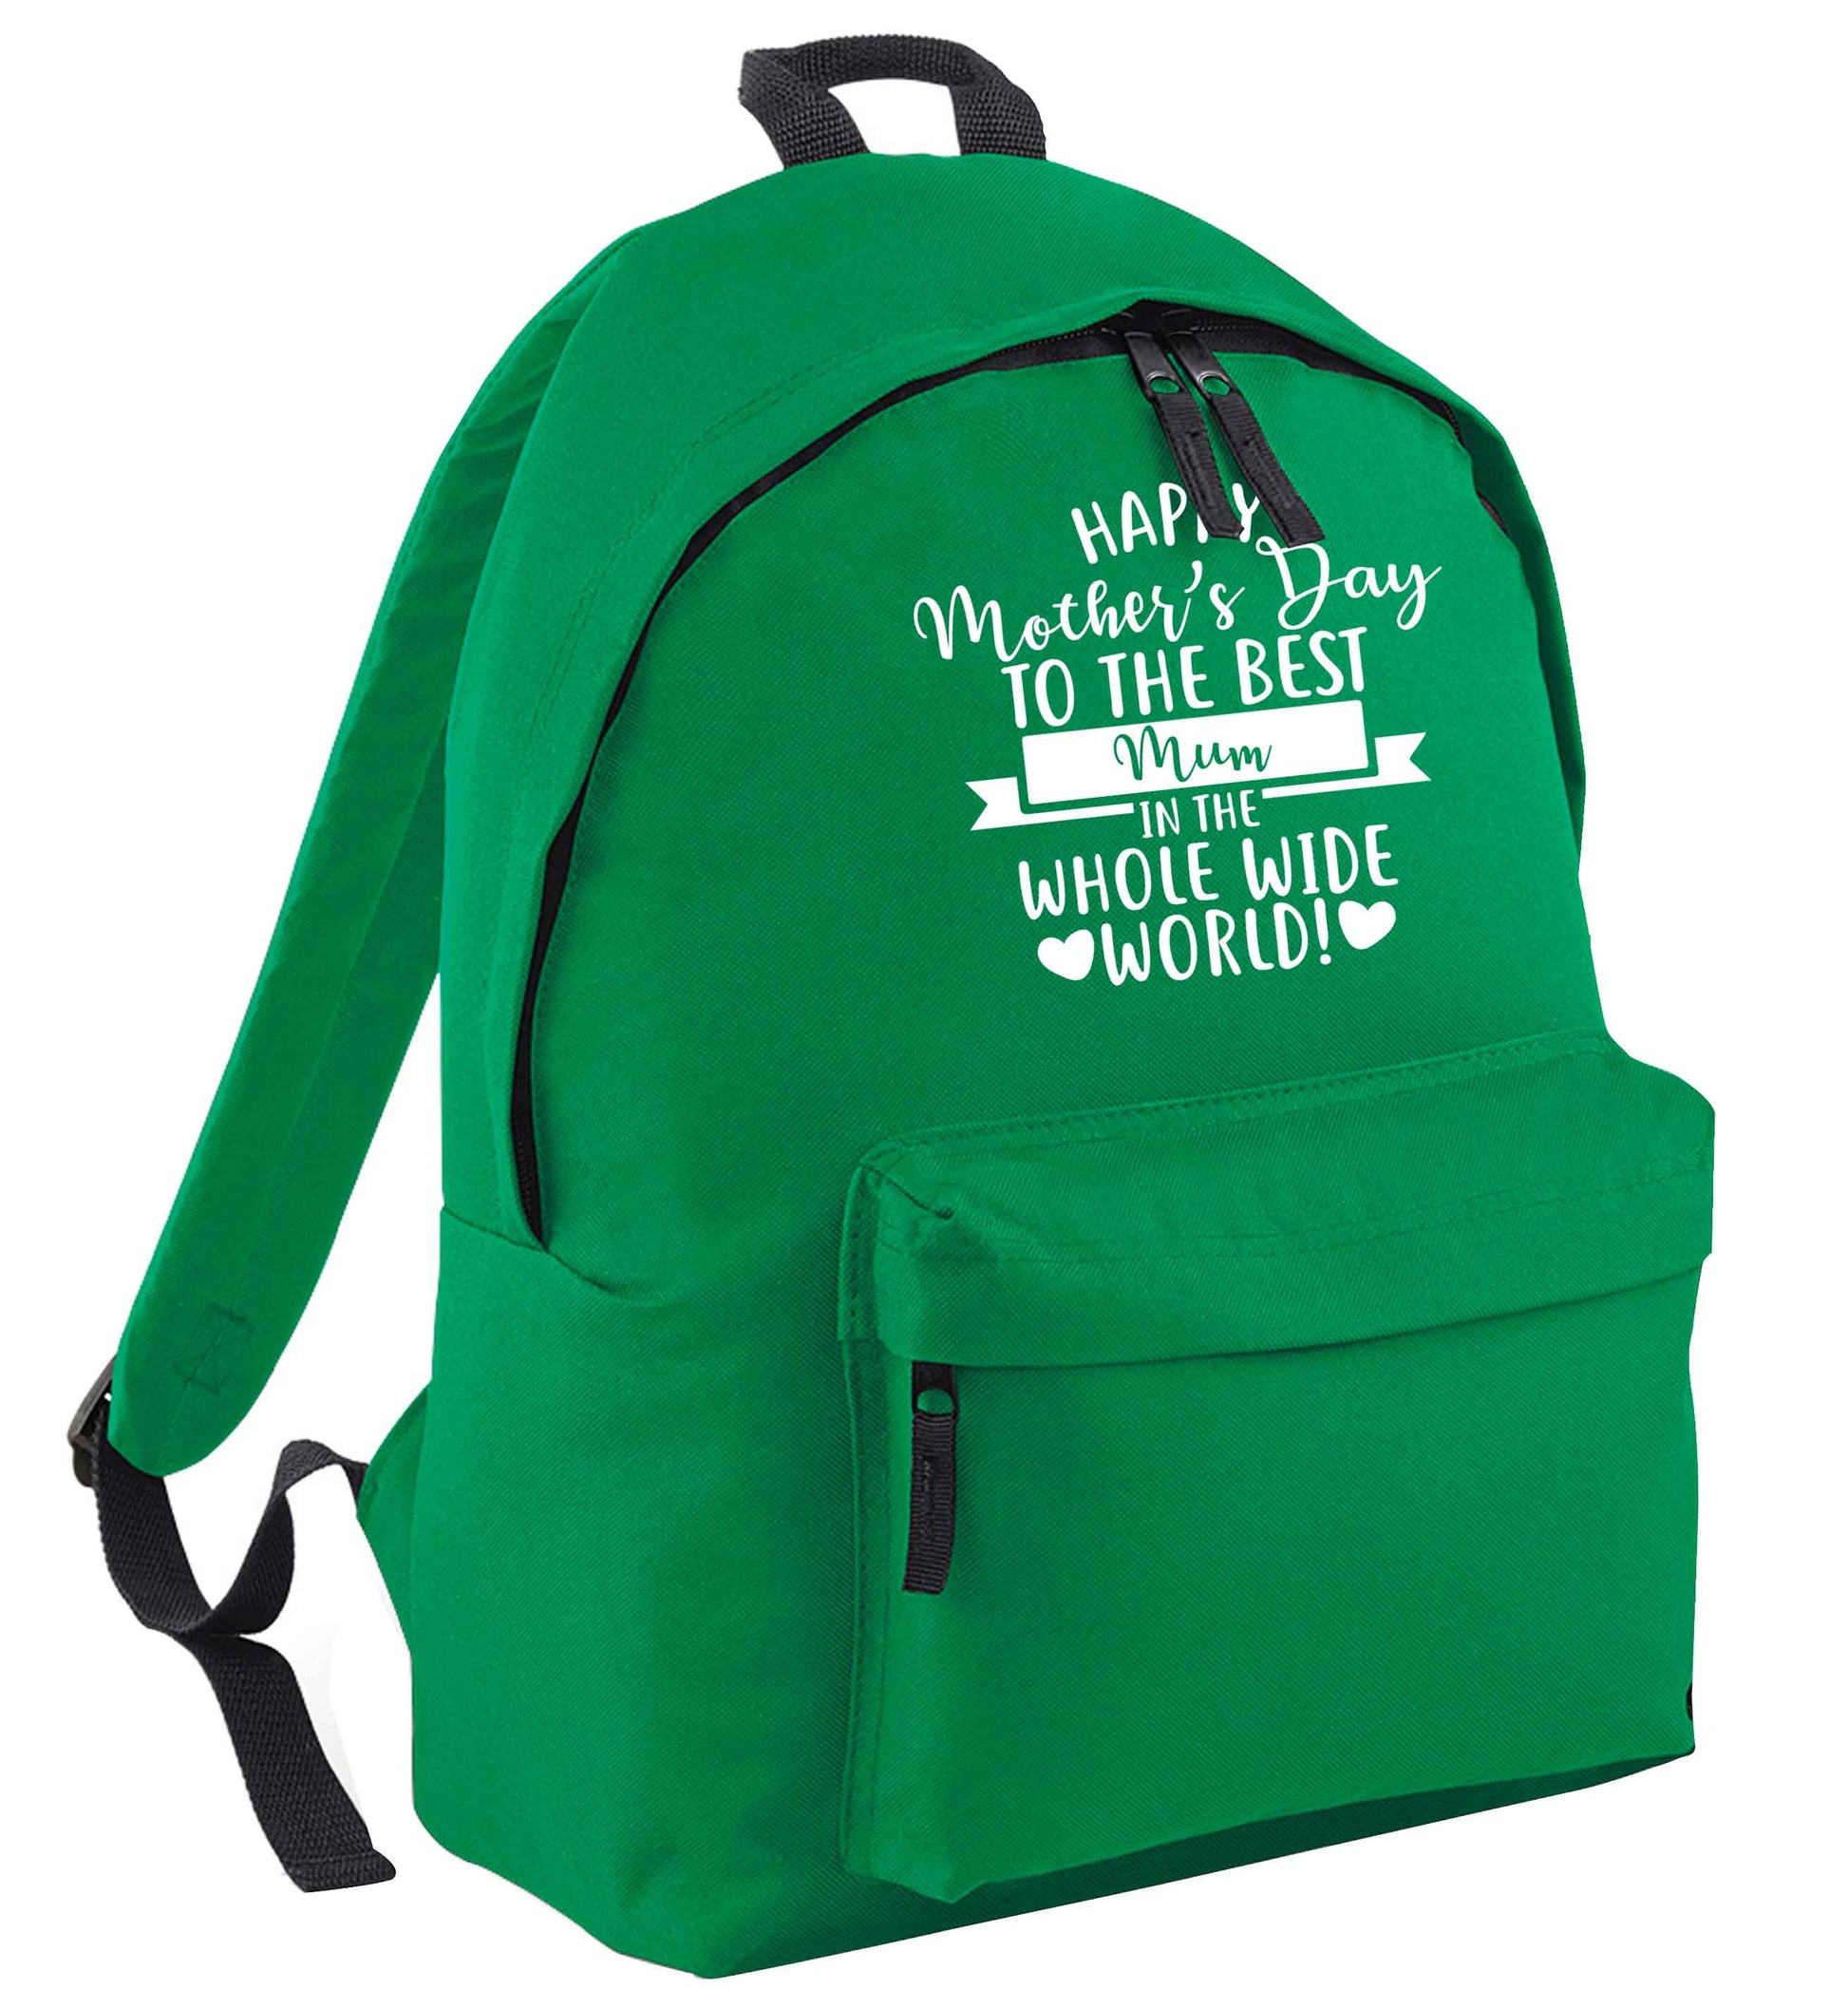 Happy mother's day to the best mum in the world green adults backpack